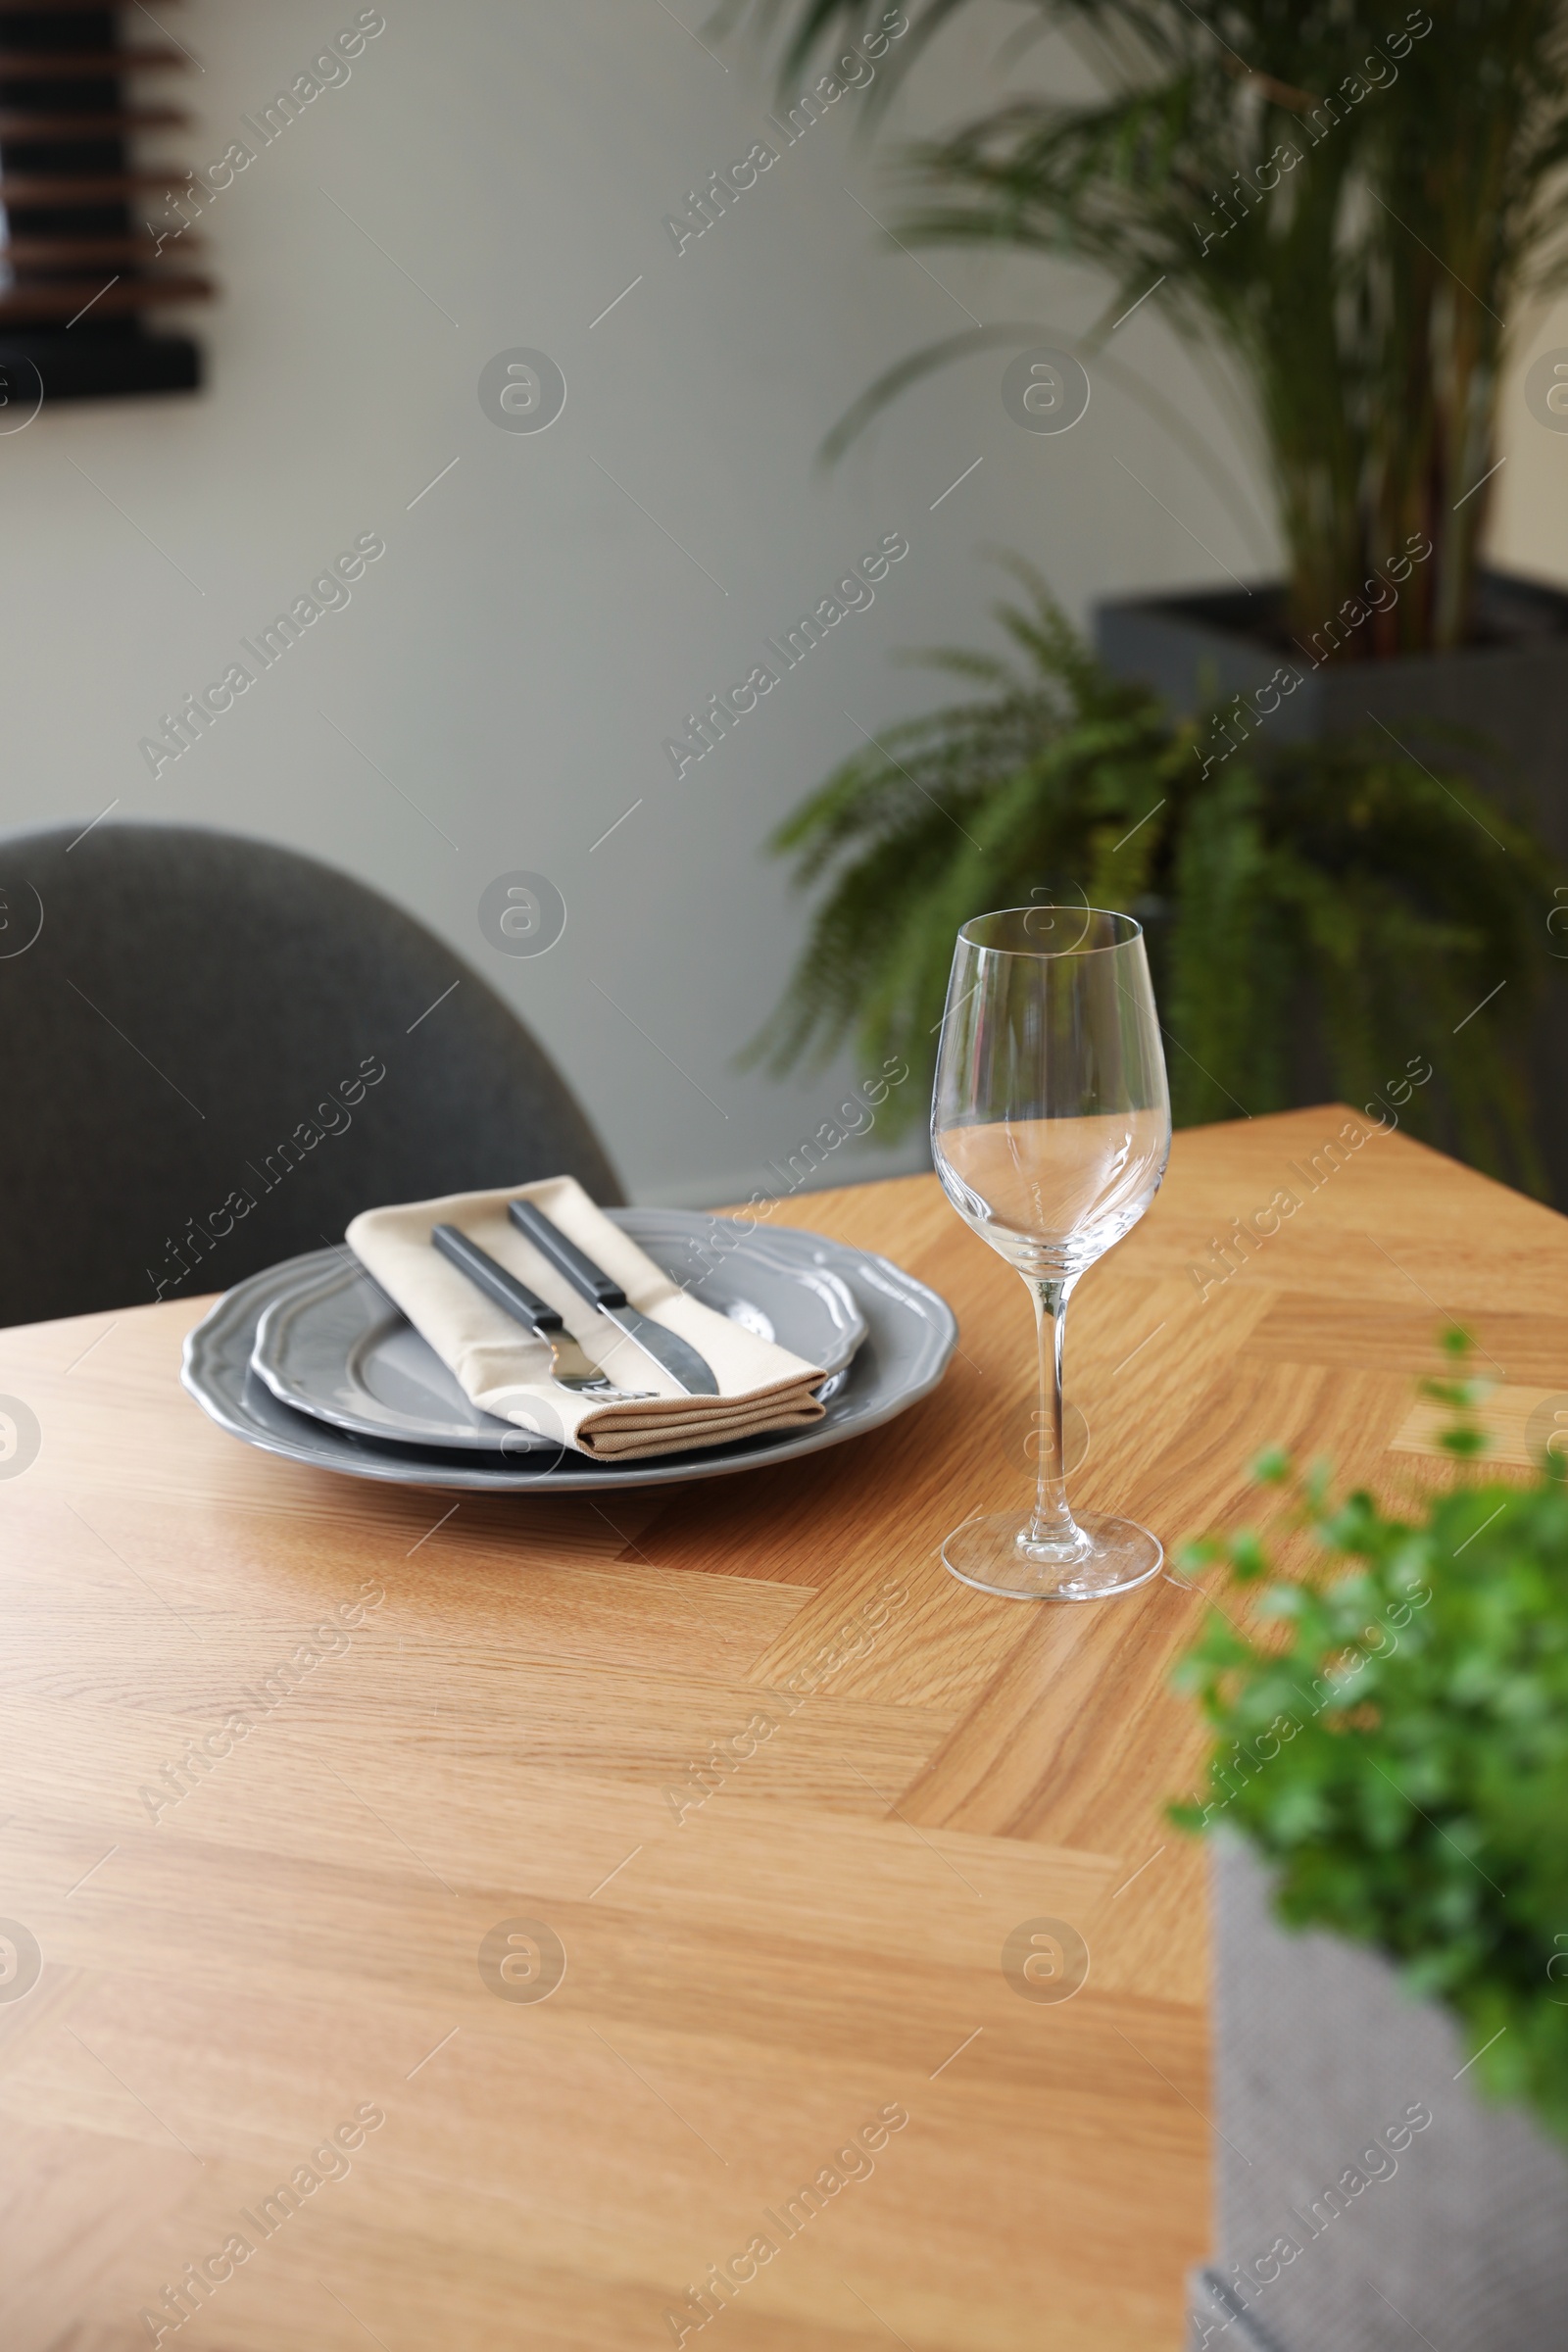 Photo of Glass and plates on wooden table in dining room